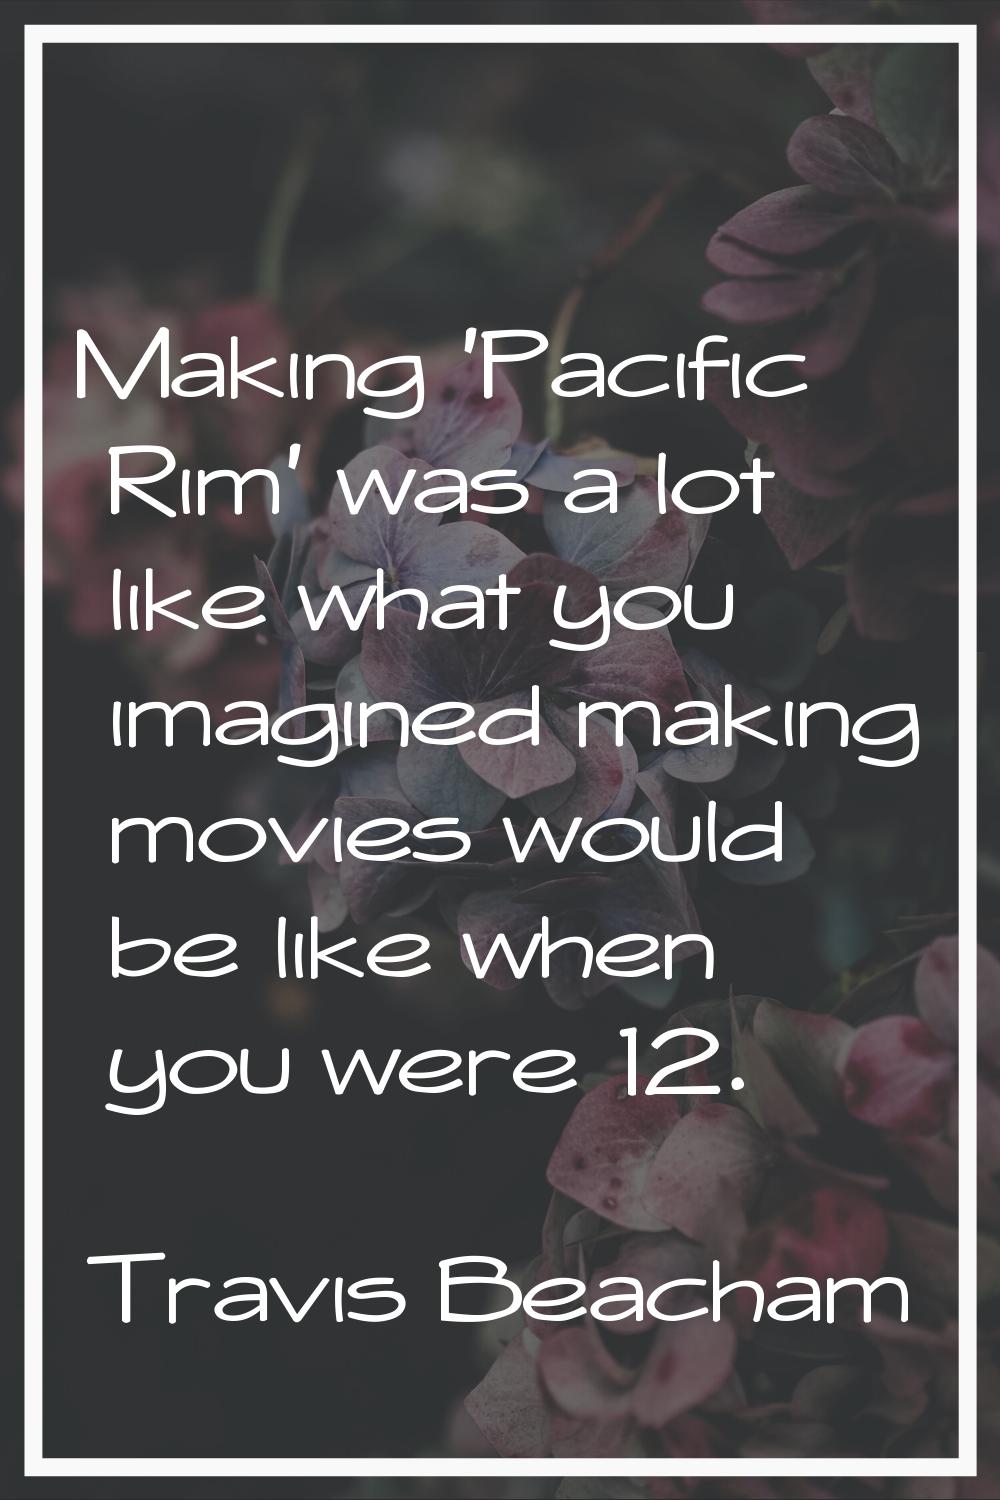 Making 'Pacific Rim' was a lot like what you imagined making movies would be like when you were 12.